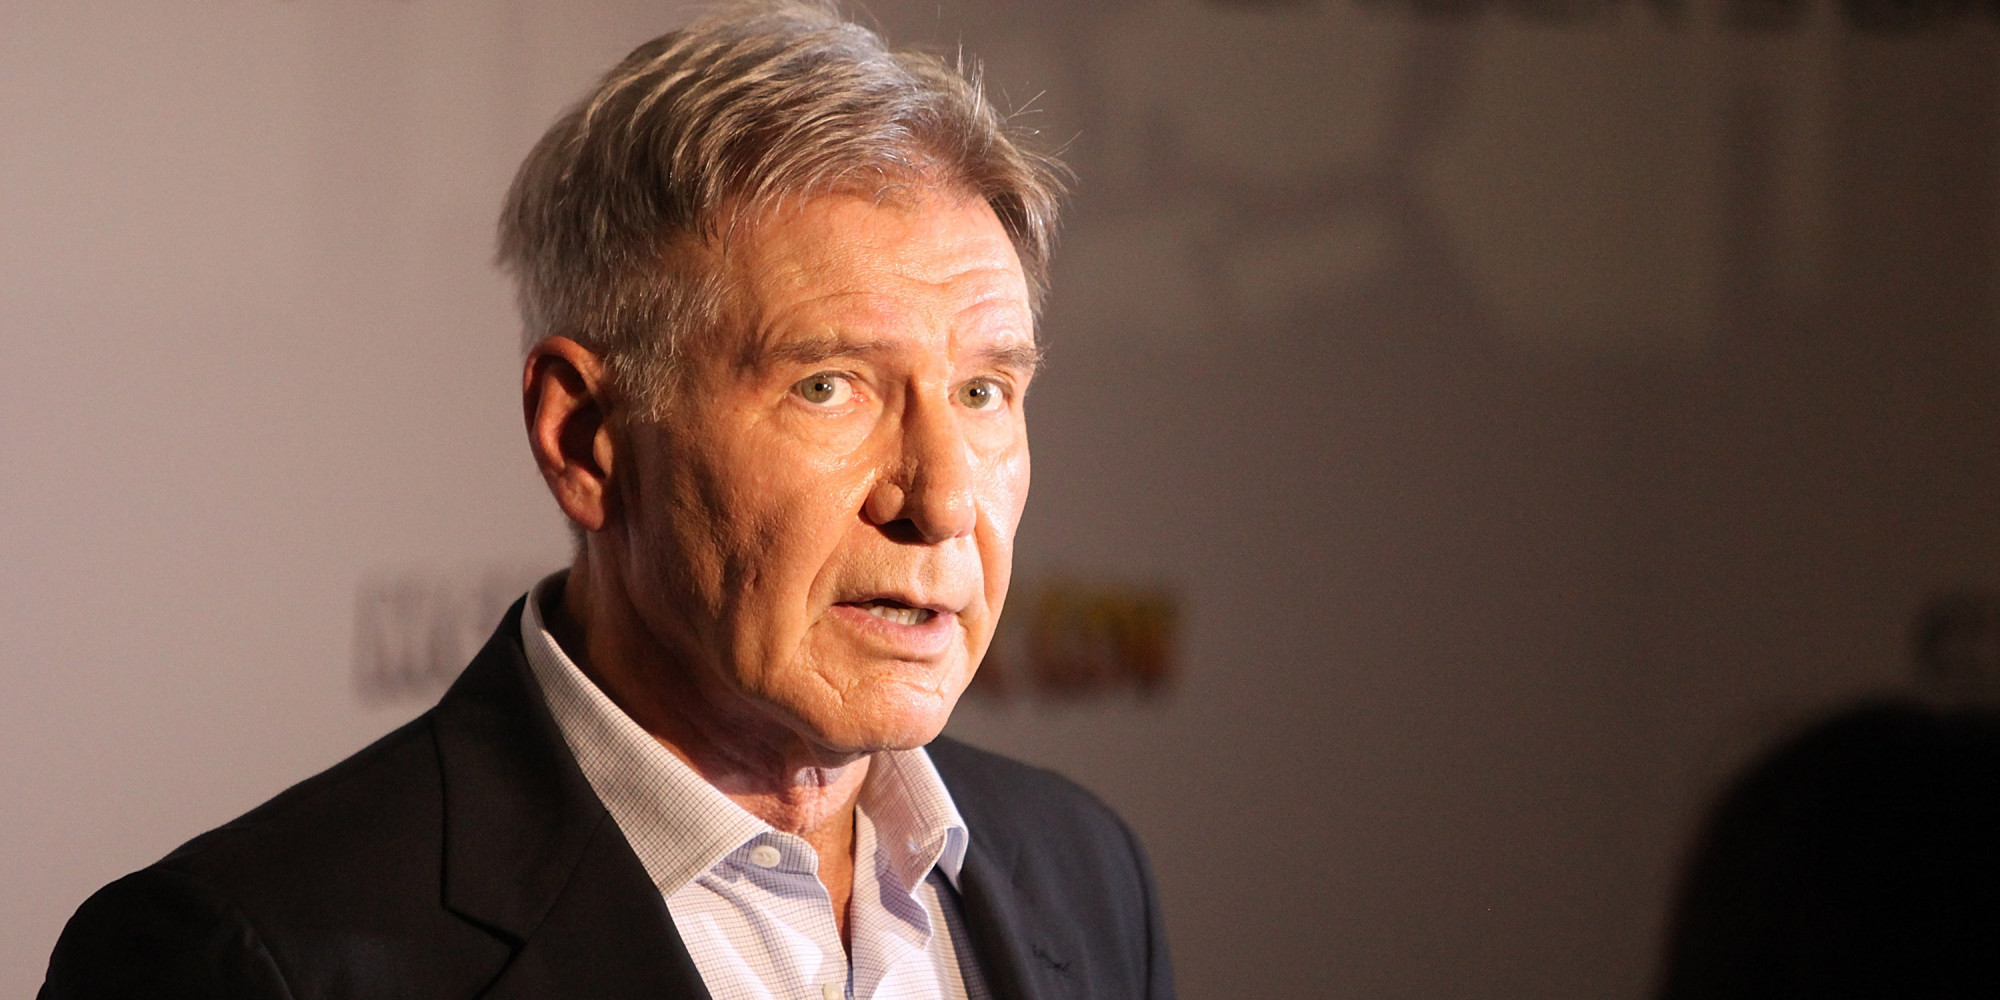 Harrison ford weed #7